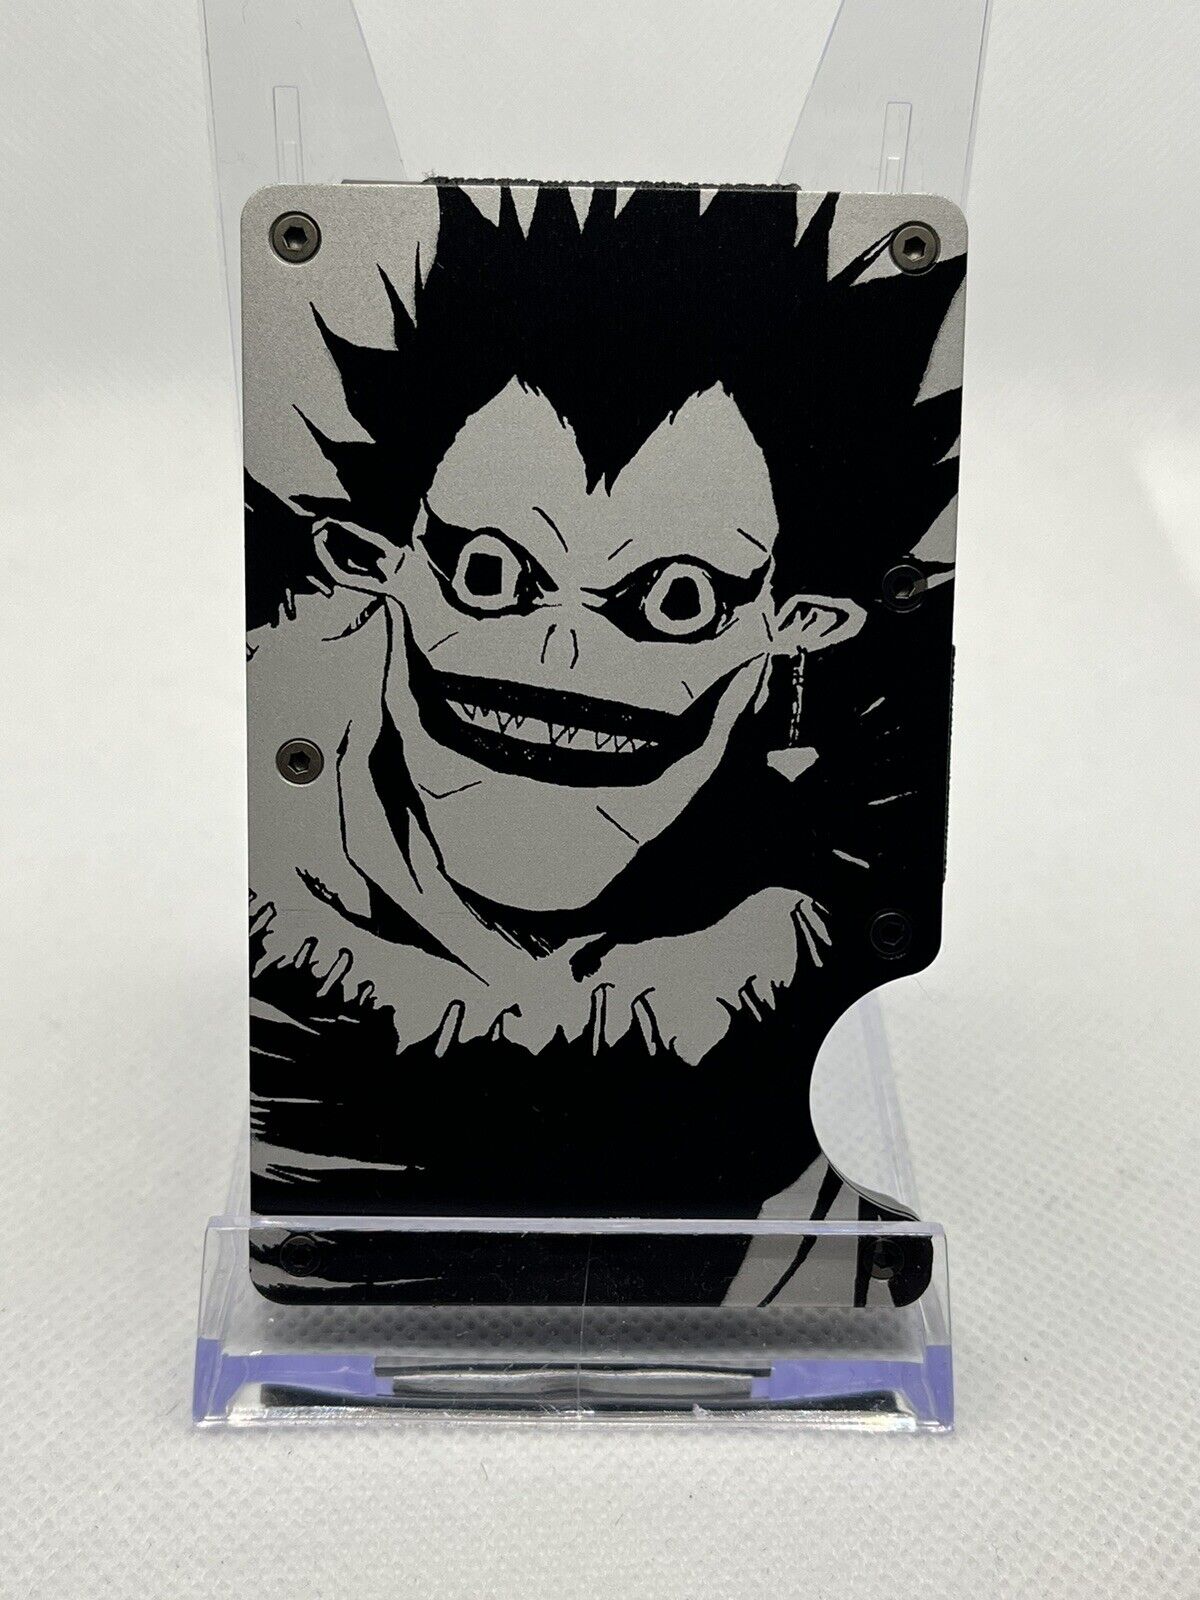 Ryuk Metal Minimalist Wallet Card Case From Death Note Anime